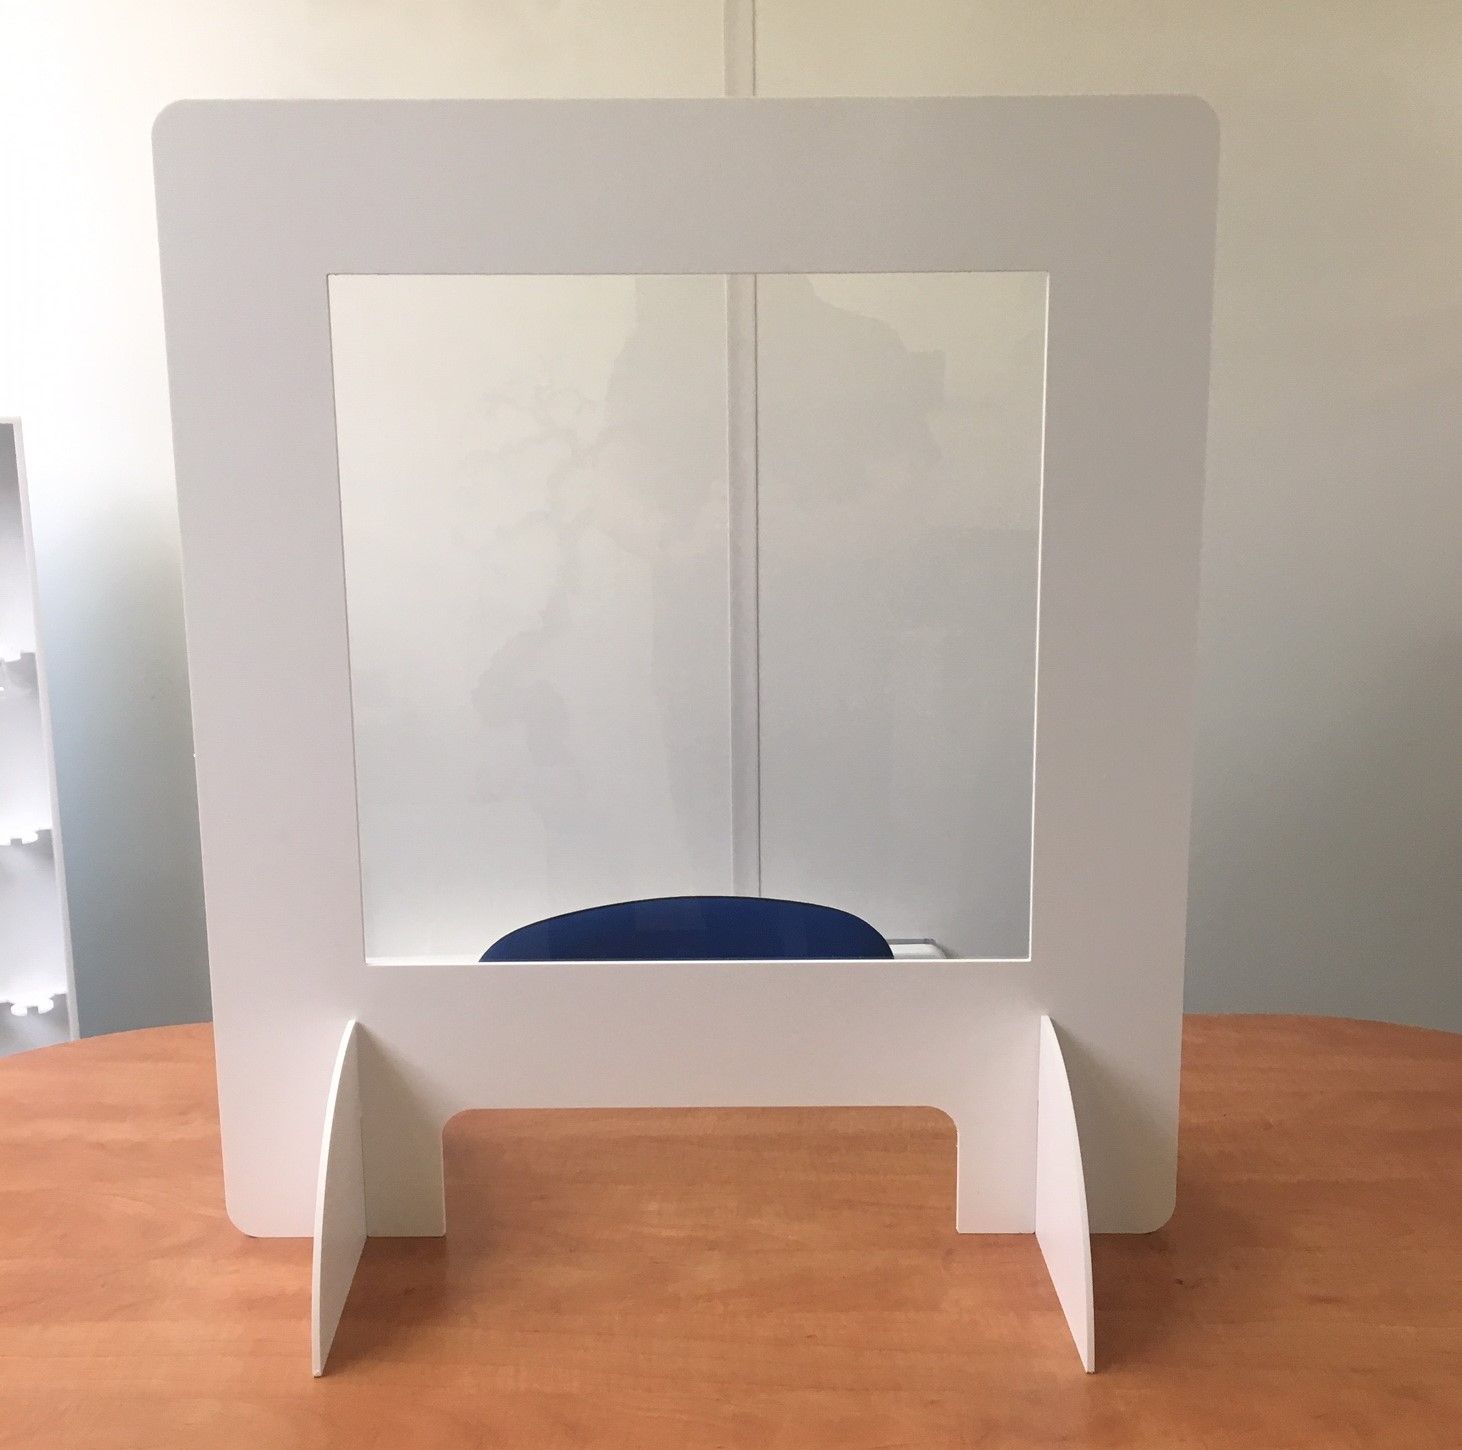 General Purpose Free Standing Protection Screen